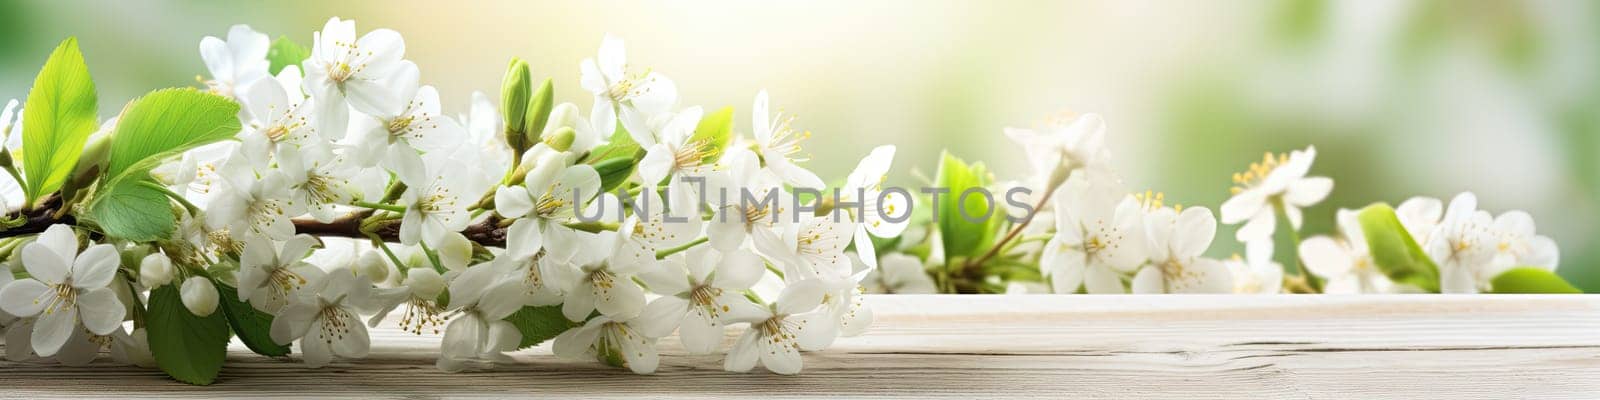 Spring background with white blossoms, flooring concept by Kadula